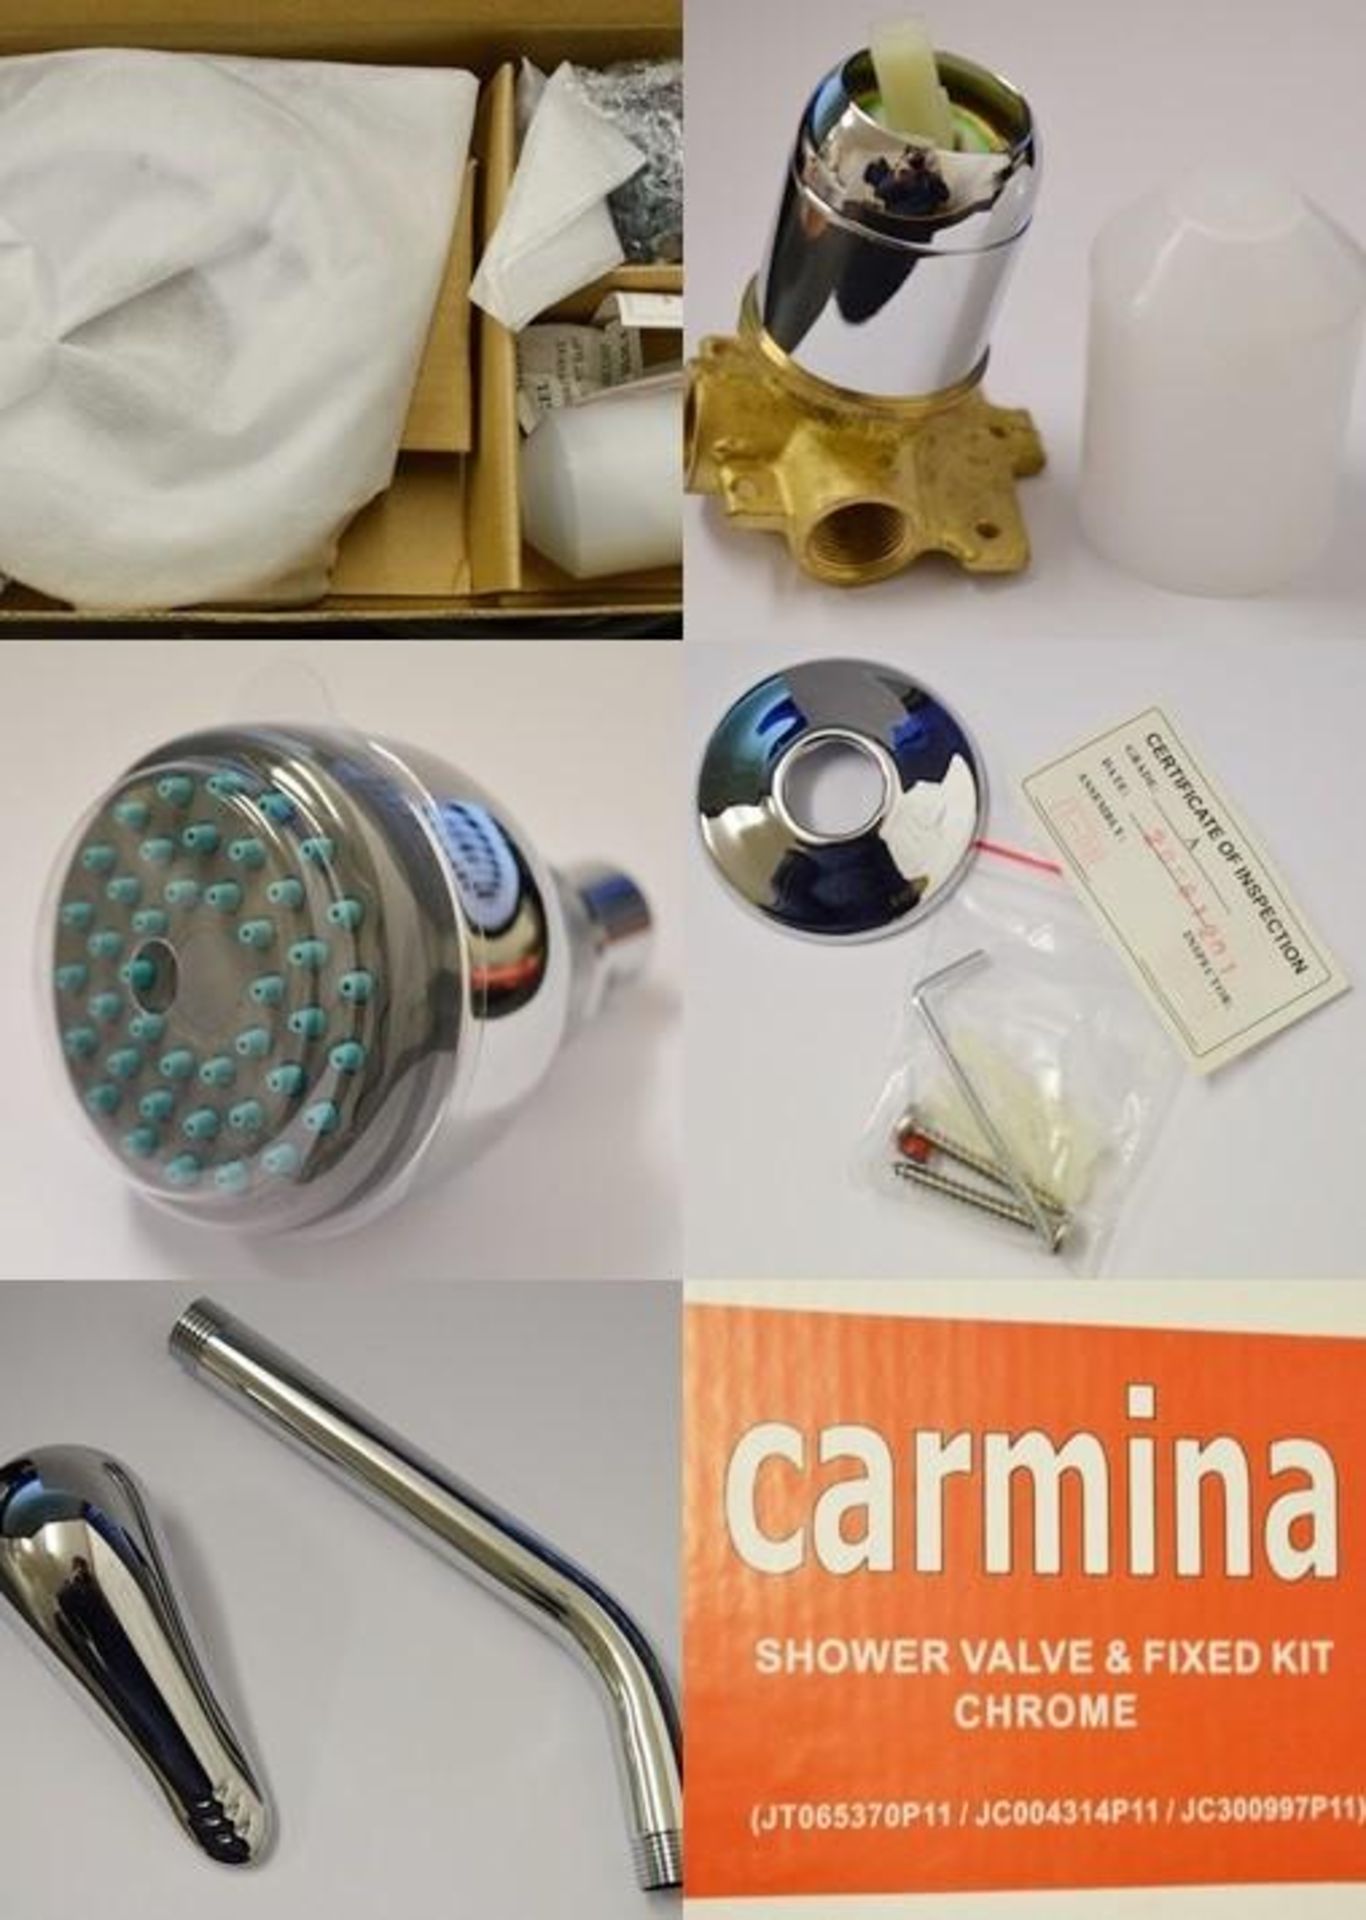 6 x Carmina Shower Valve Kits - Contains Chrome Shower Head, Fixed Arm and Manual Control - Brass Co